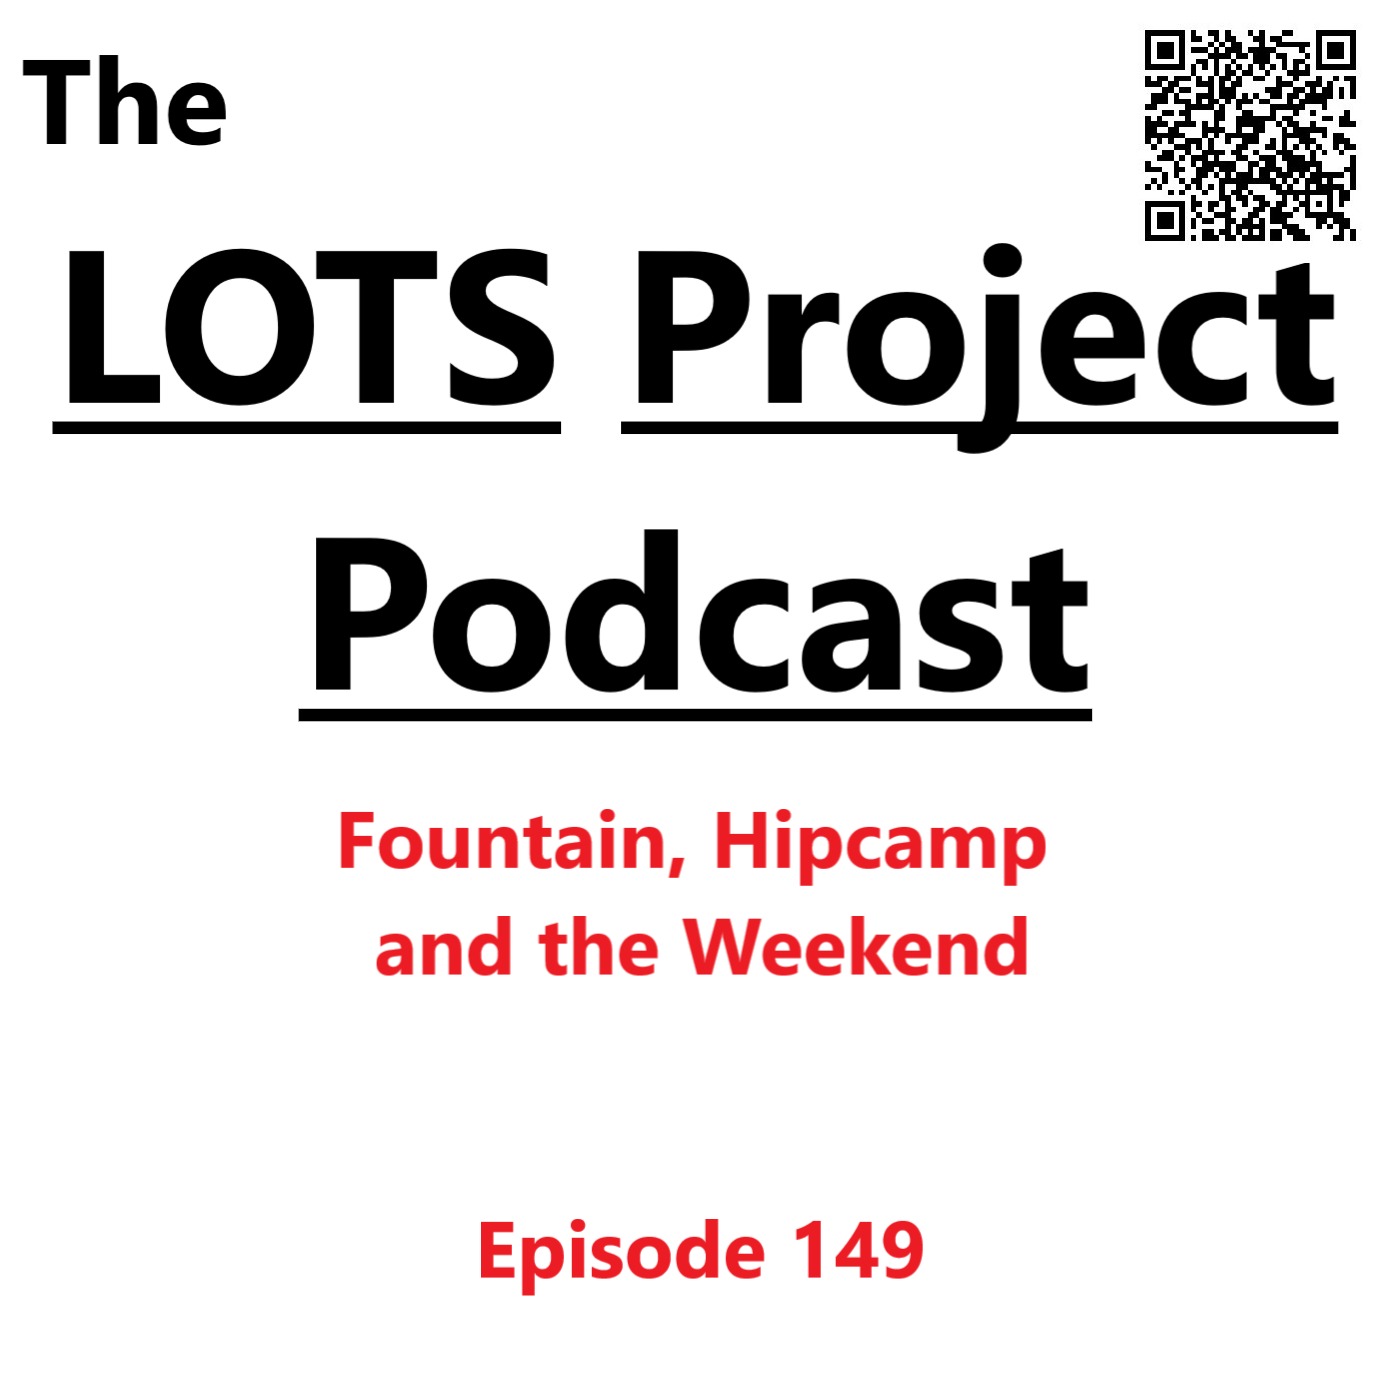 Fountain, Hipcamp and the Weekend